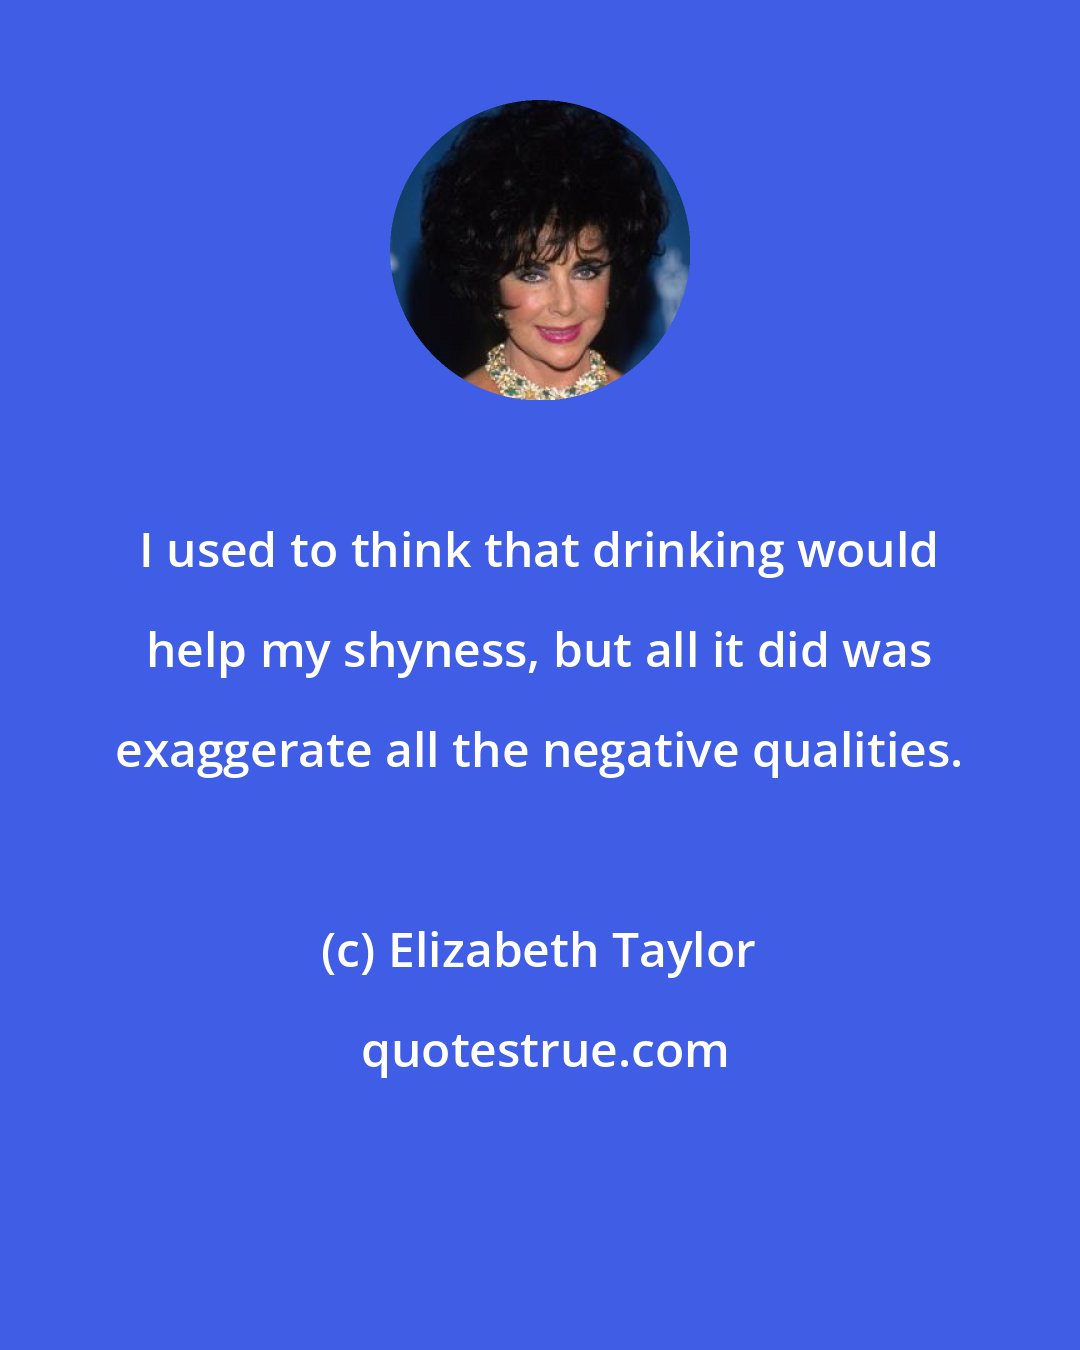 Elizabeth Taylor: I used to think that drinking would help my shyness, but all it did was exaggerate all the negative qualities.